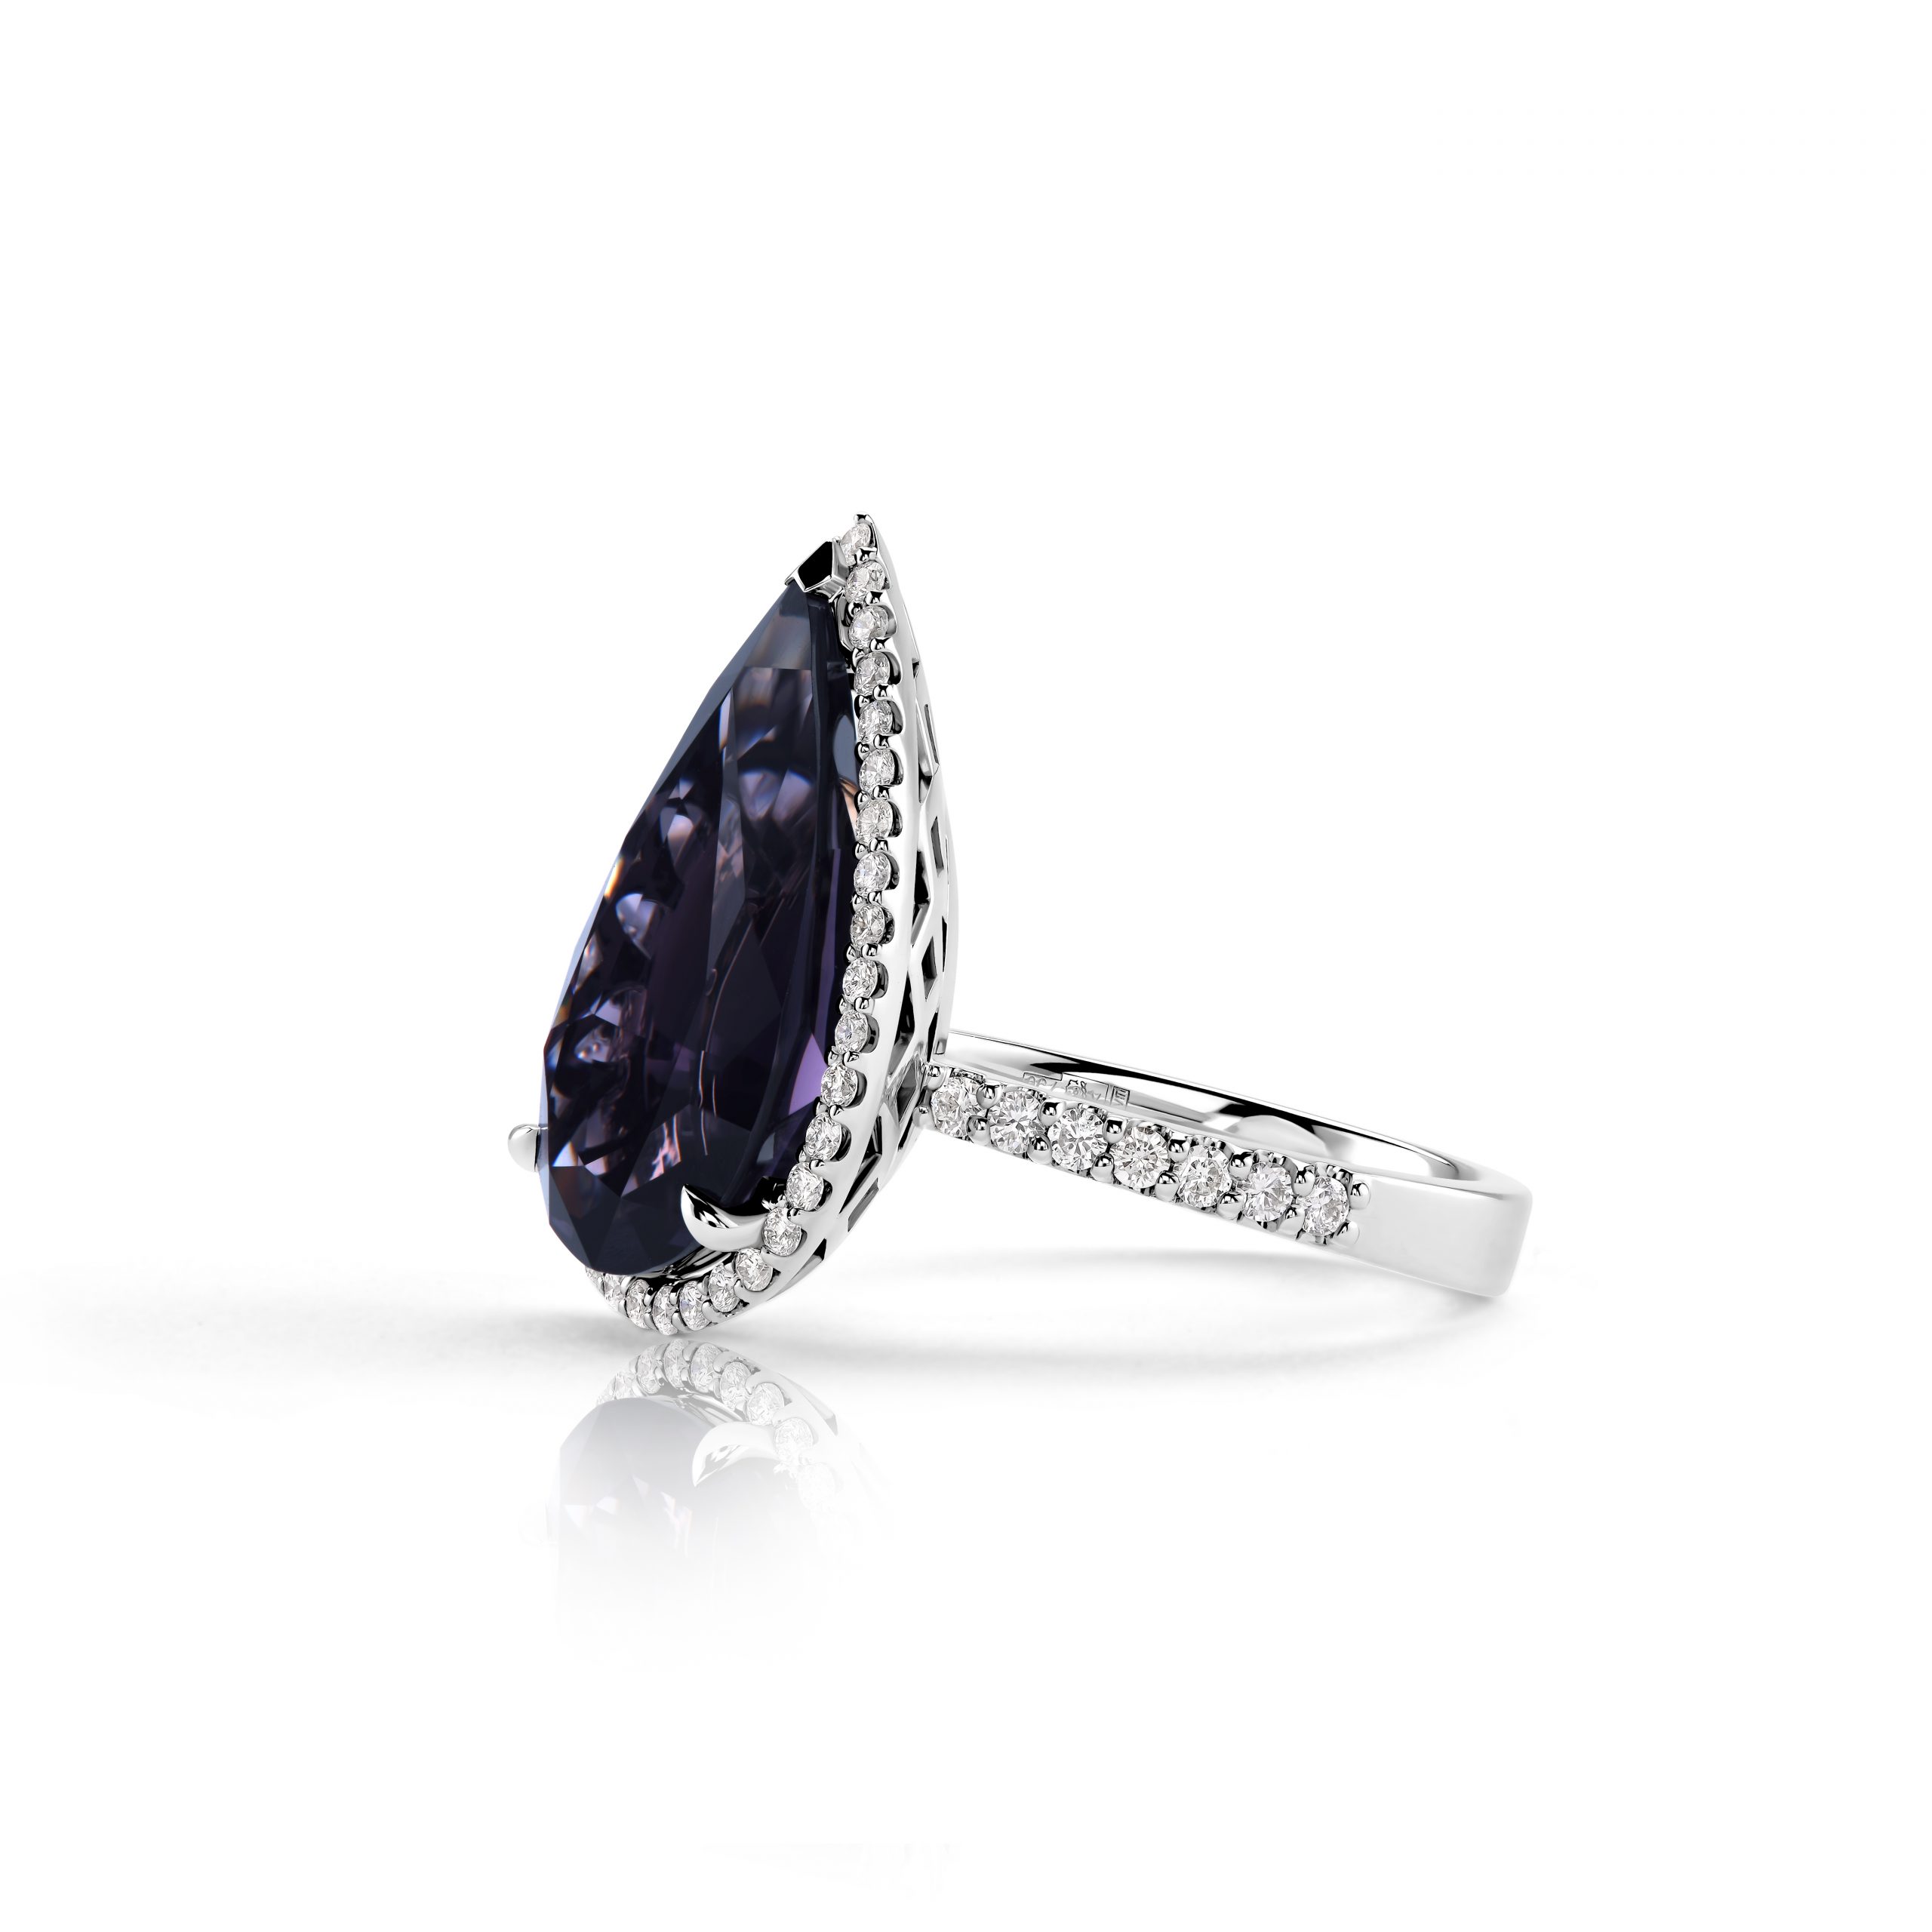 Spinel ring 9.11 ct #2